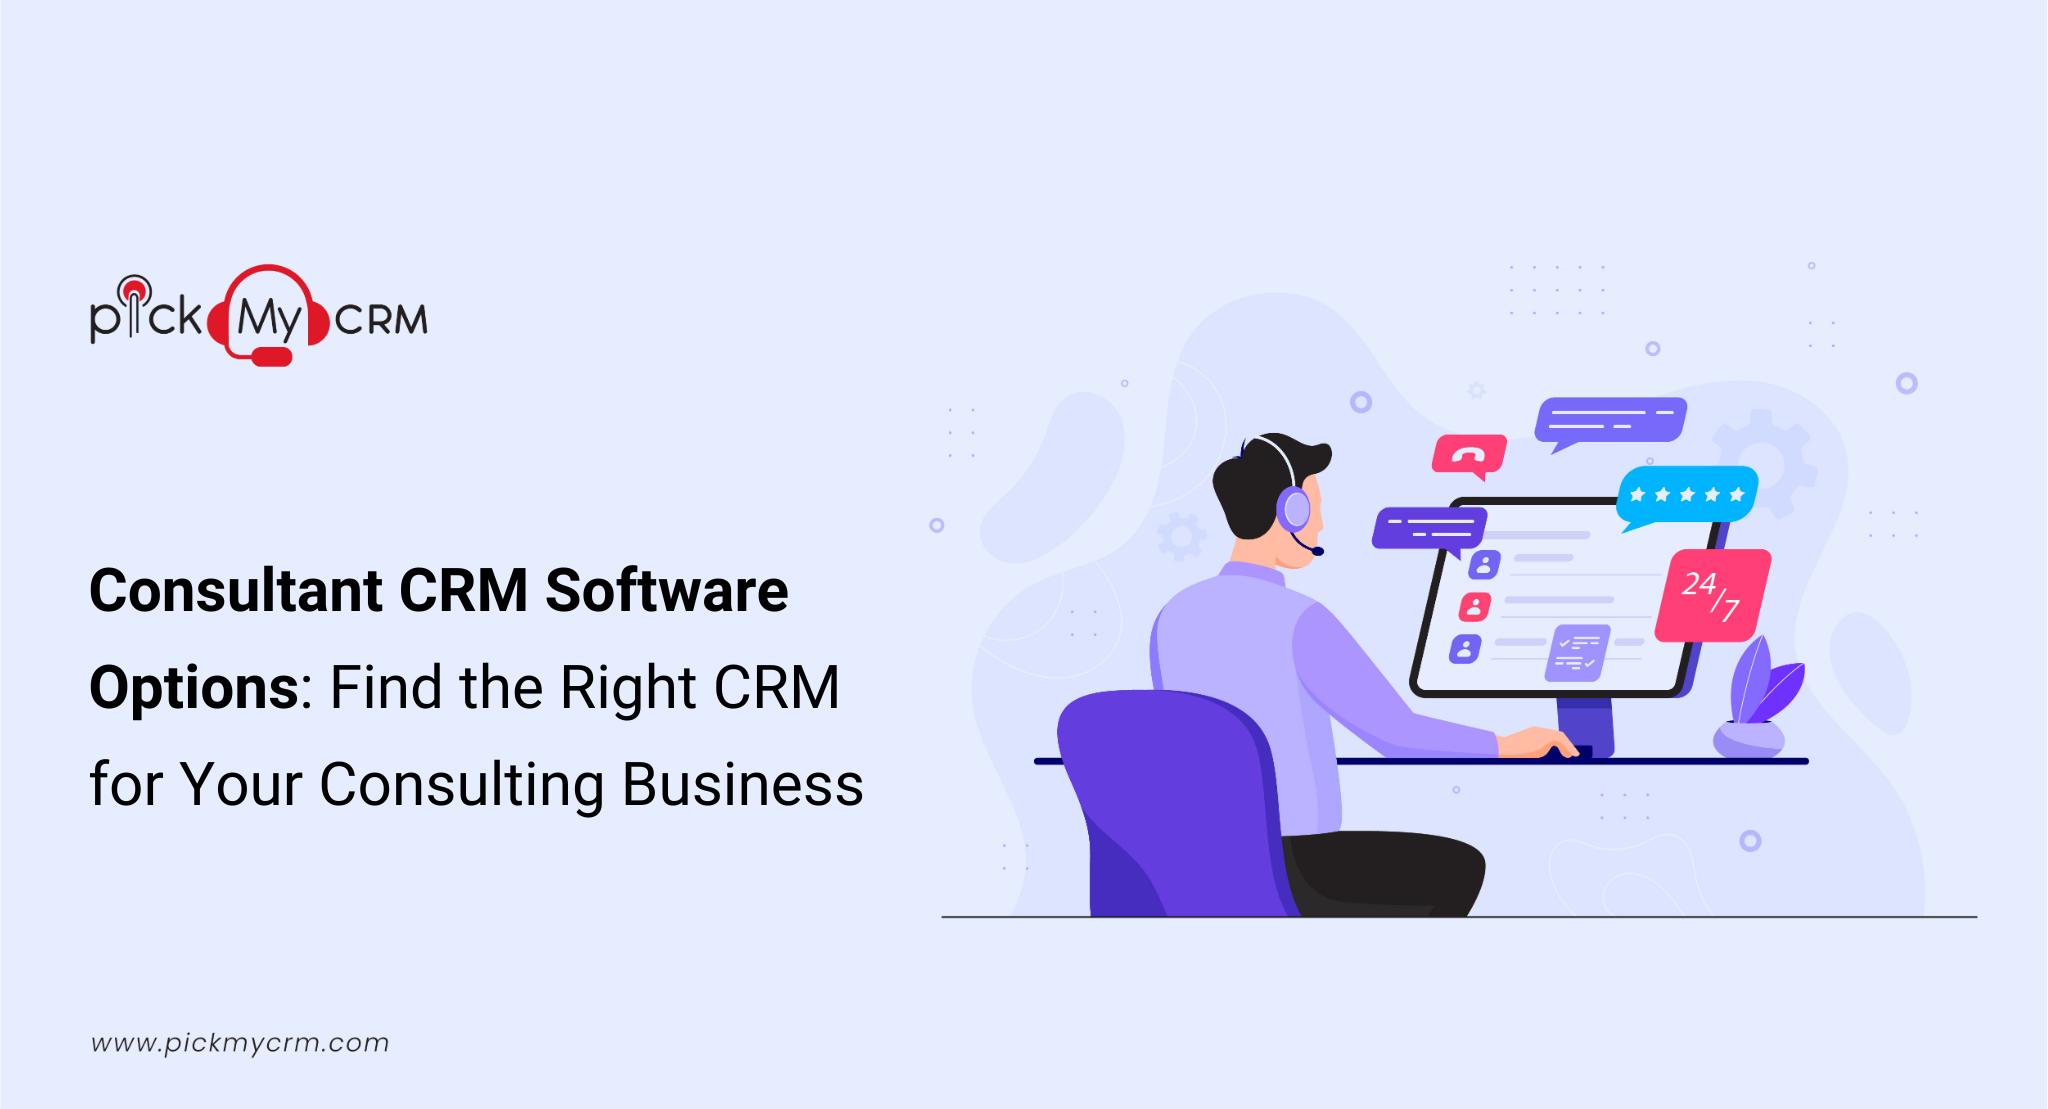 Consultant CRM Software Options: Find the Right CRM for Your Consulting Business